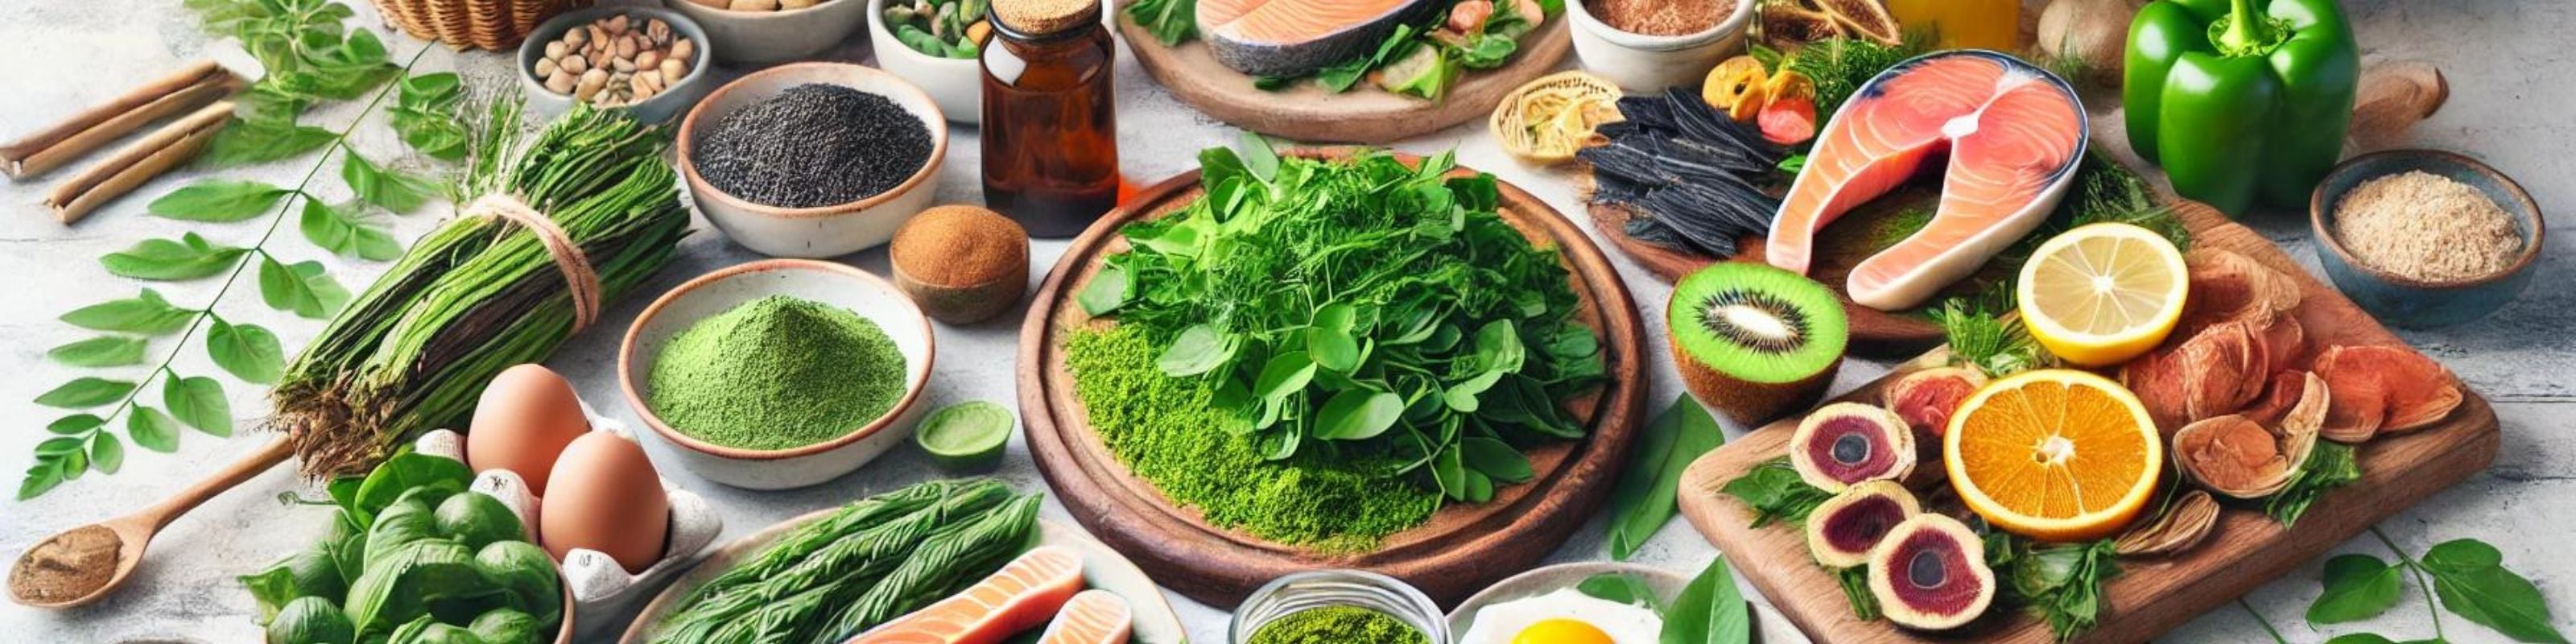 vibrant banner image featuring an assortment of nutrient-rich foods. They highlight fresh Moringa leaves, Moringa powder, grilled salmon, poached eggs, seaweed, and a variety of fresh fruits and vegetables, all set in a bright, natural kitchen